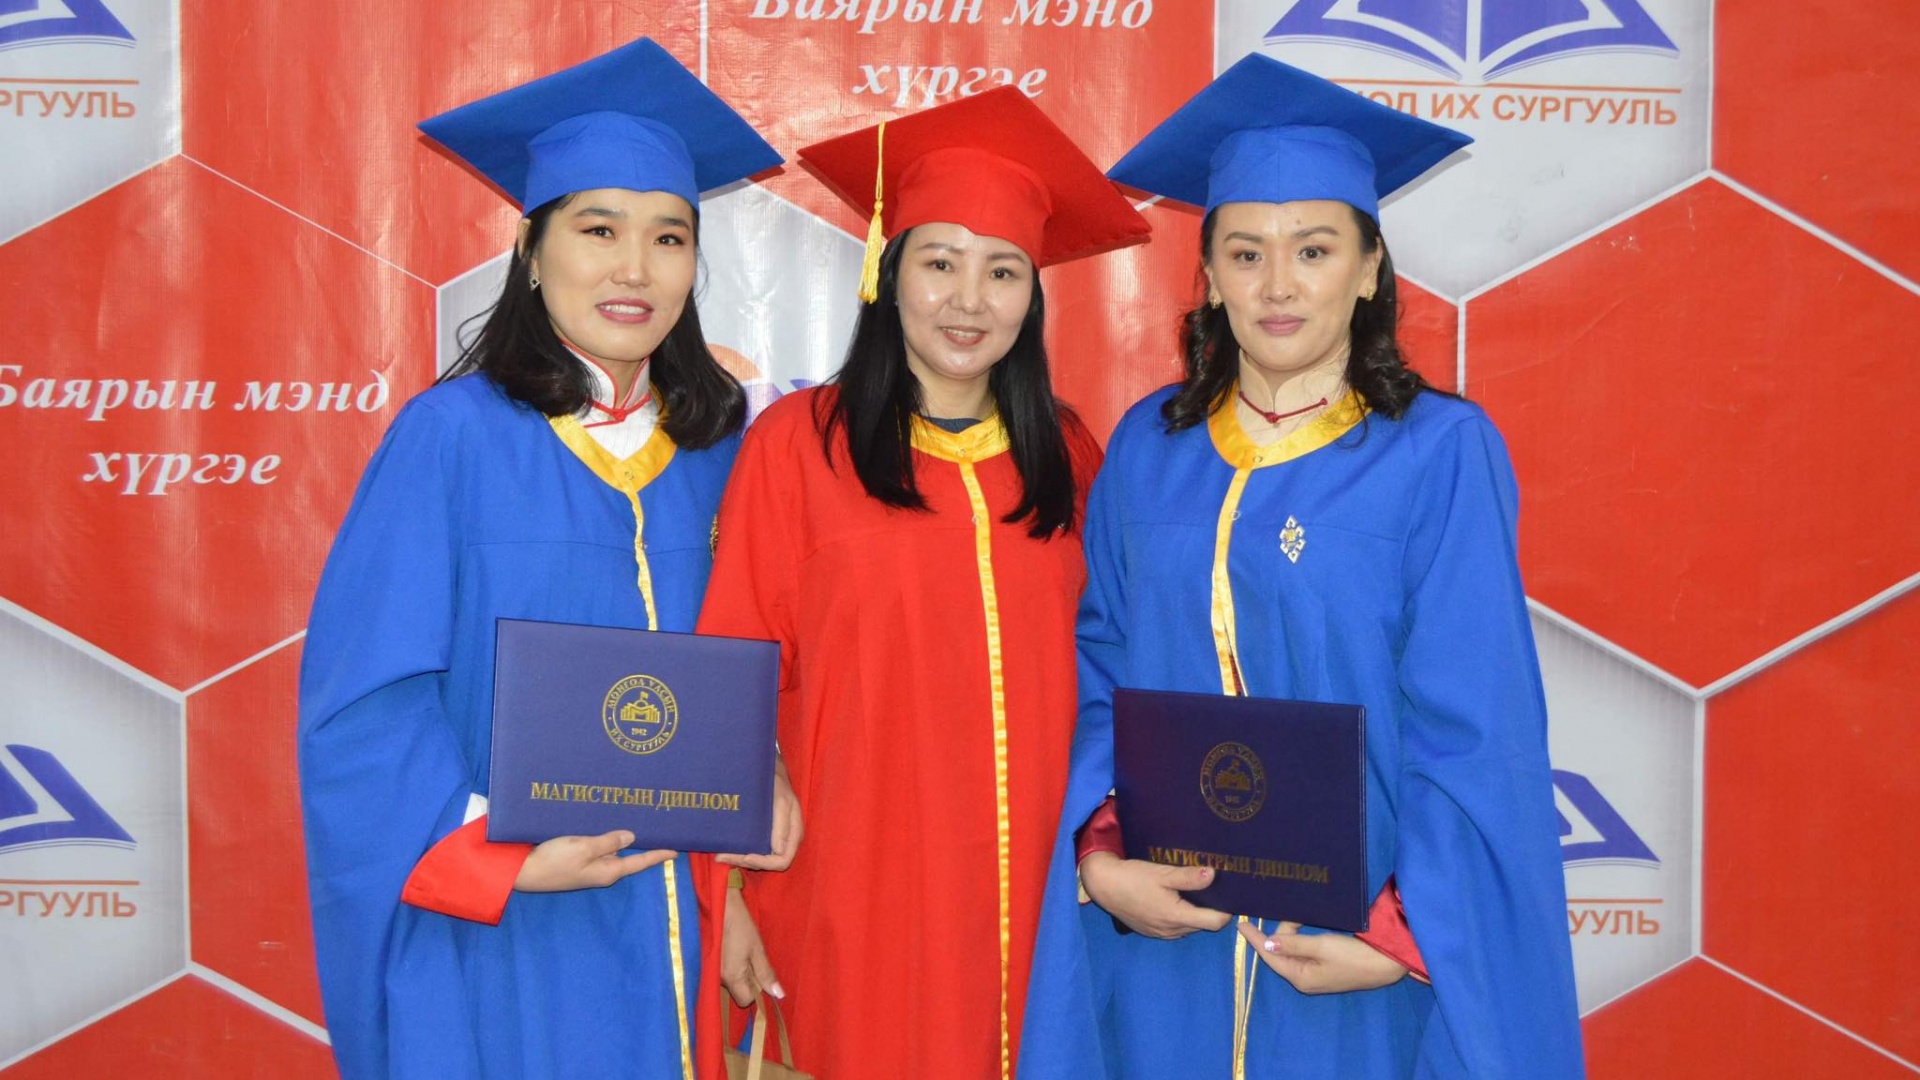 The Erasmus project, “Training teachers of Inclusive Education in Mongolia” funded by the European Union, has been implemented at the Dornod School of the National University of Mongolia in 2020-2024